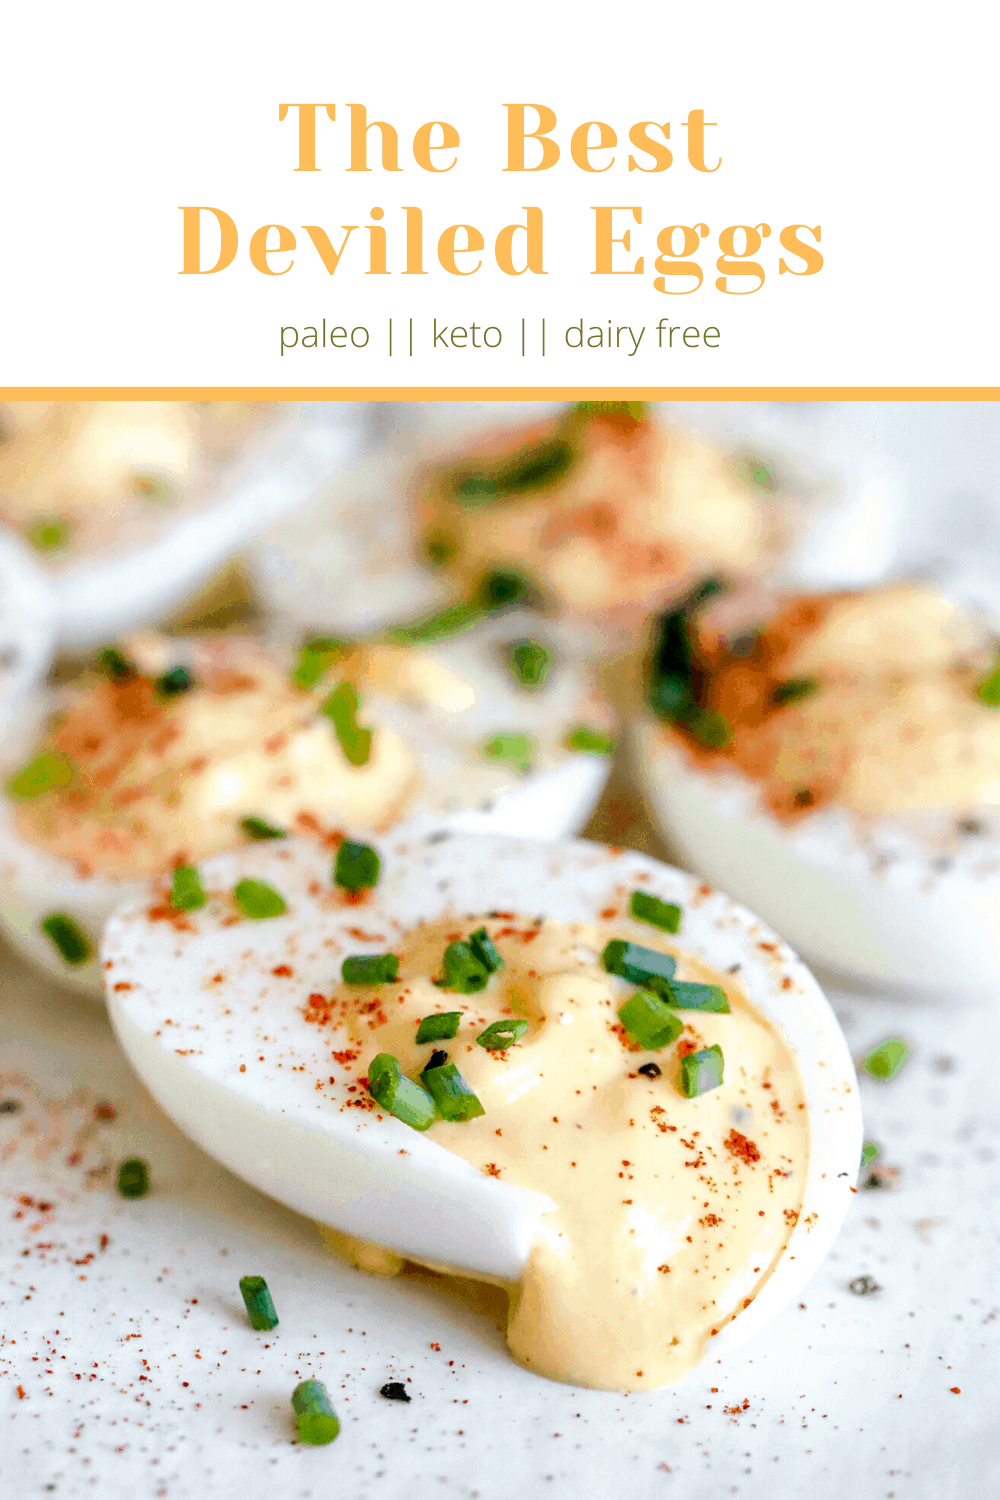 pinterest image of a side view of deviled eggs with filling oozing out and garnished with paprika and chopped chives.